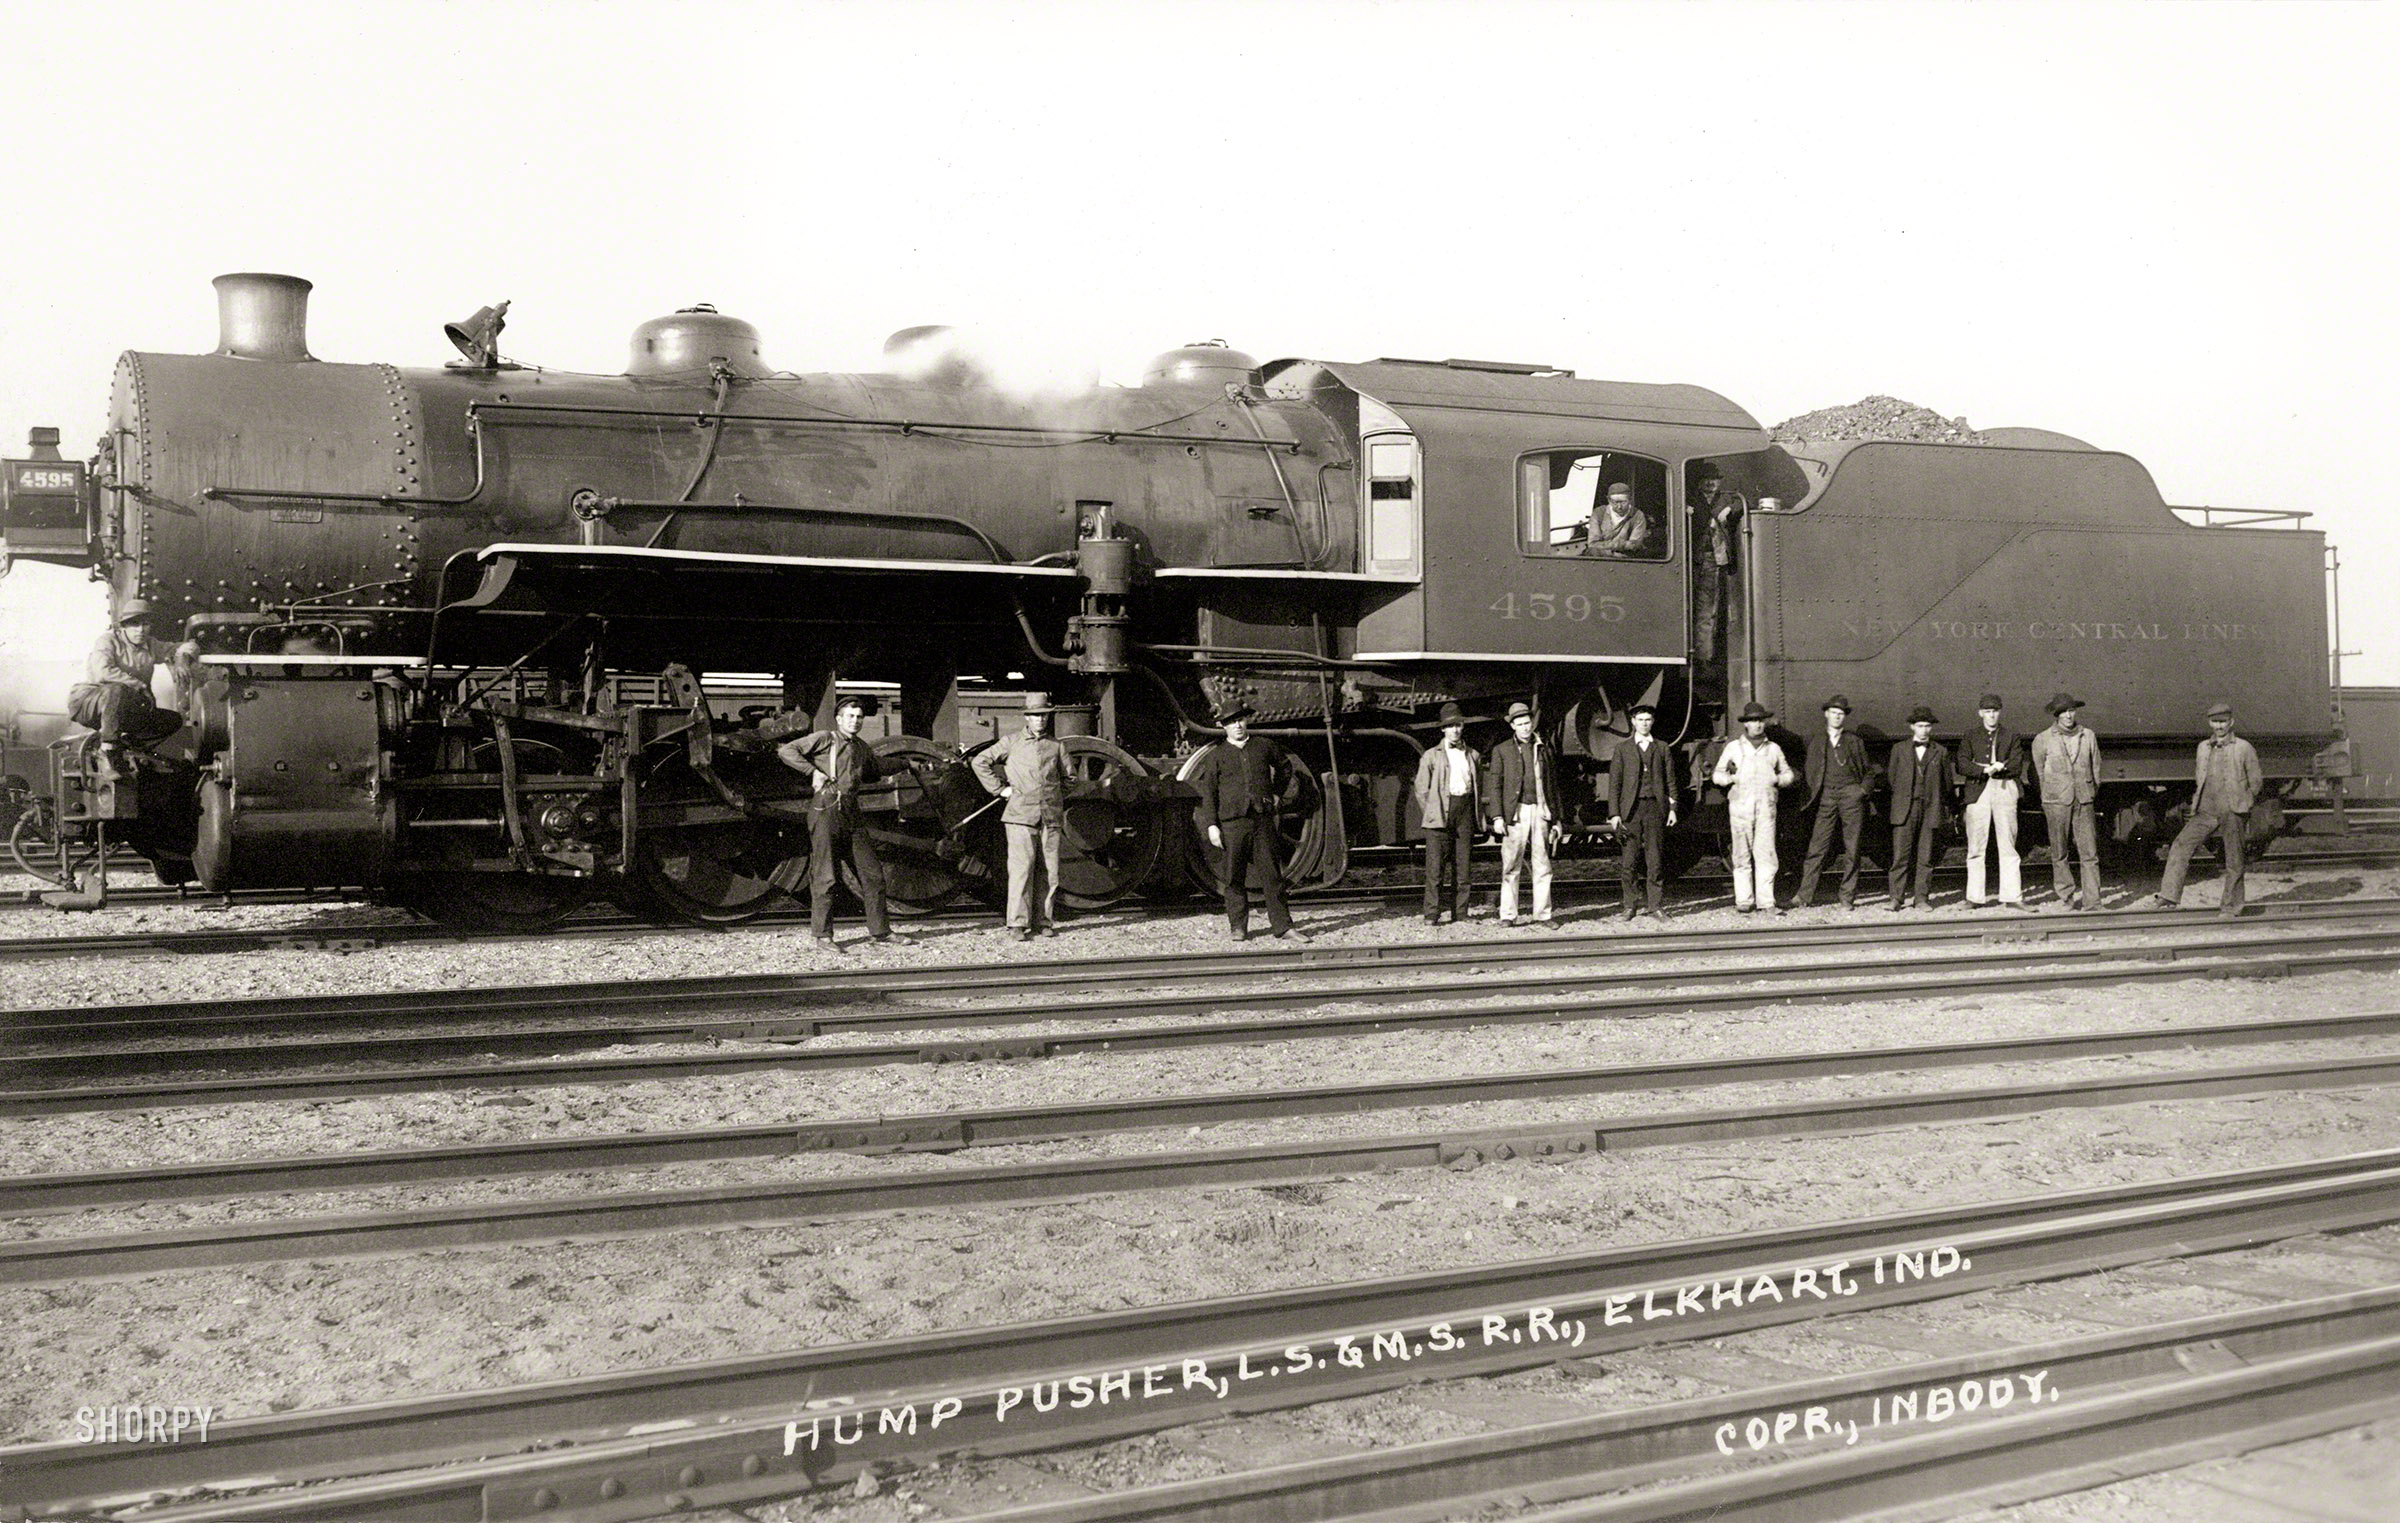 August 19, 1912. "Hump pusher, L.S. & M.S. R.R." On verso: "Made by J. Inbody, Elkhart, Indiana. Home Phone 500." A postcard showing trainmen of the Lake Shore & Michigan Southern Railway and Locomotive 4595. View full size.